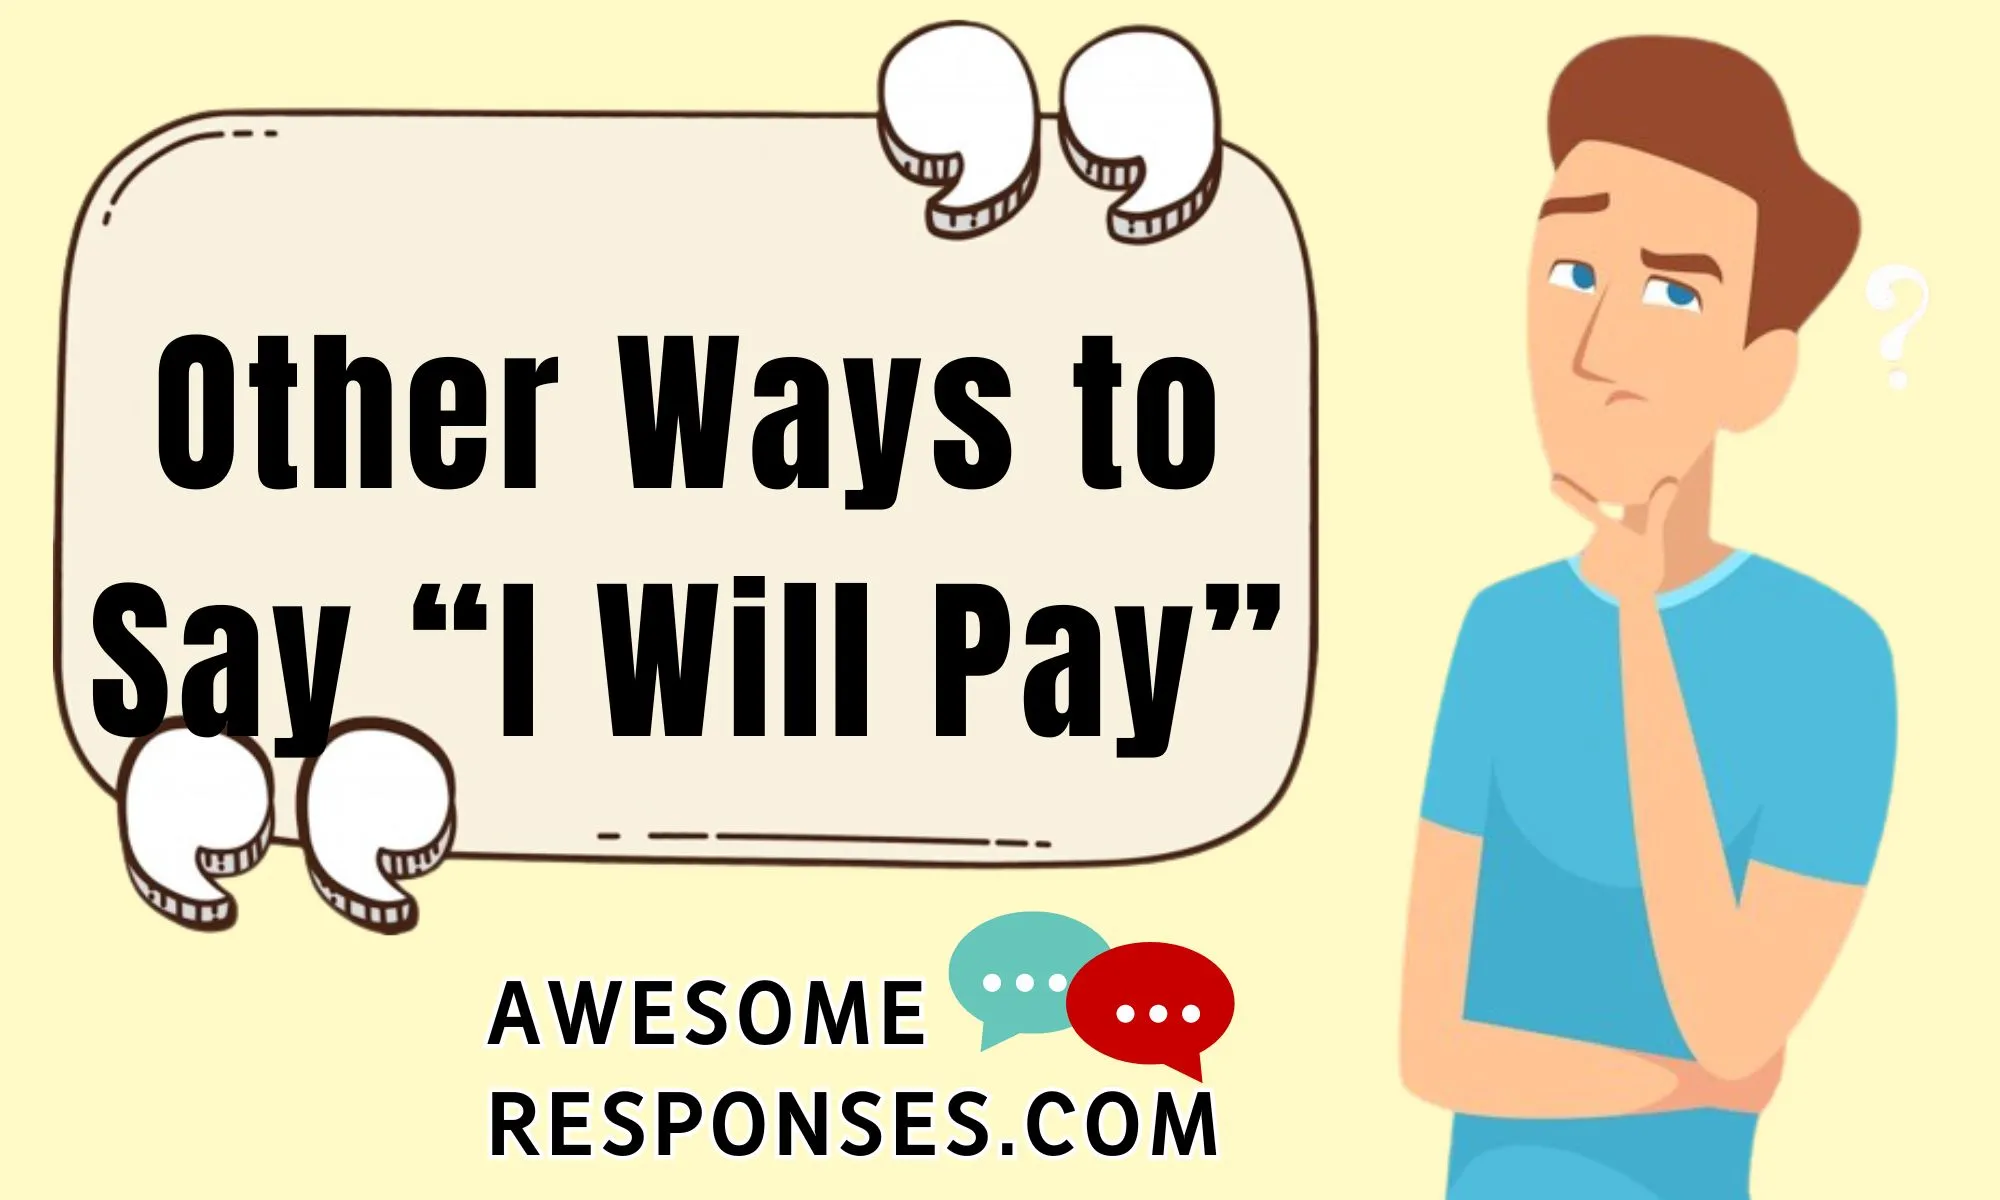 Other Ways to Say “I Will Pay”